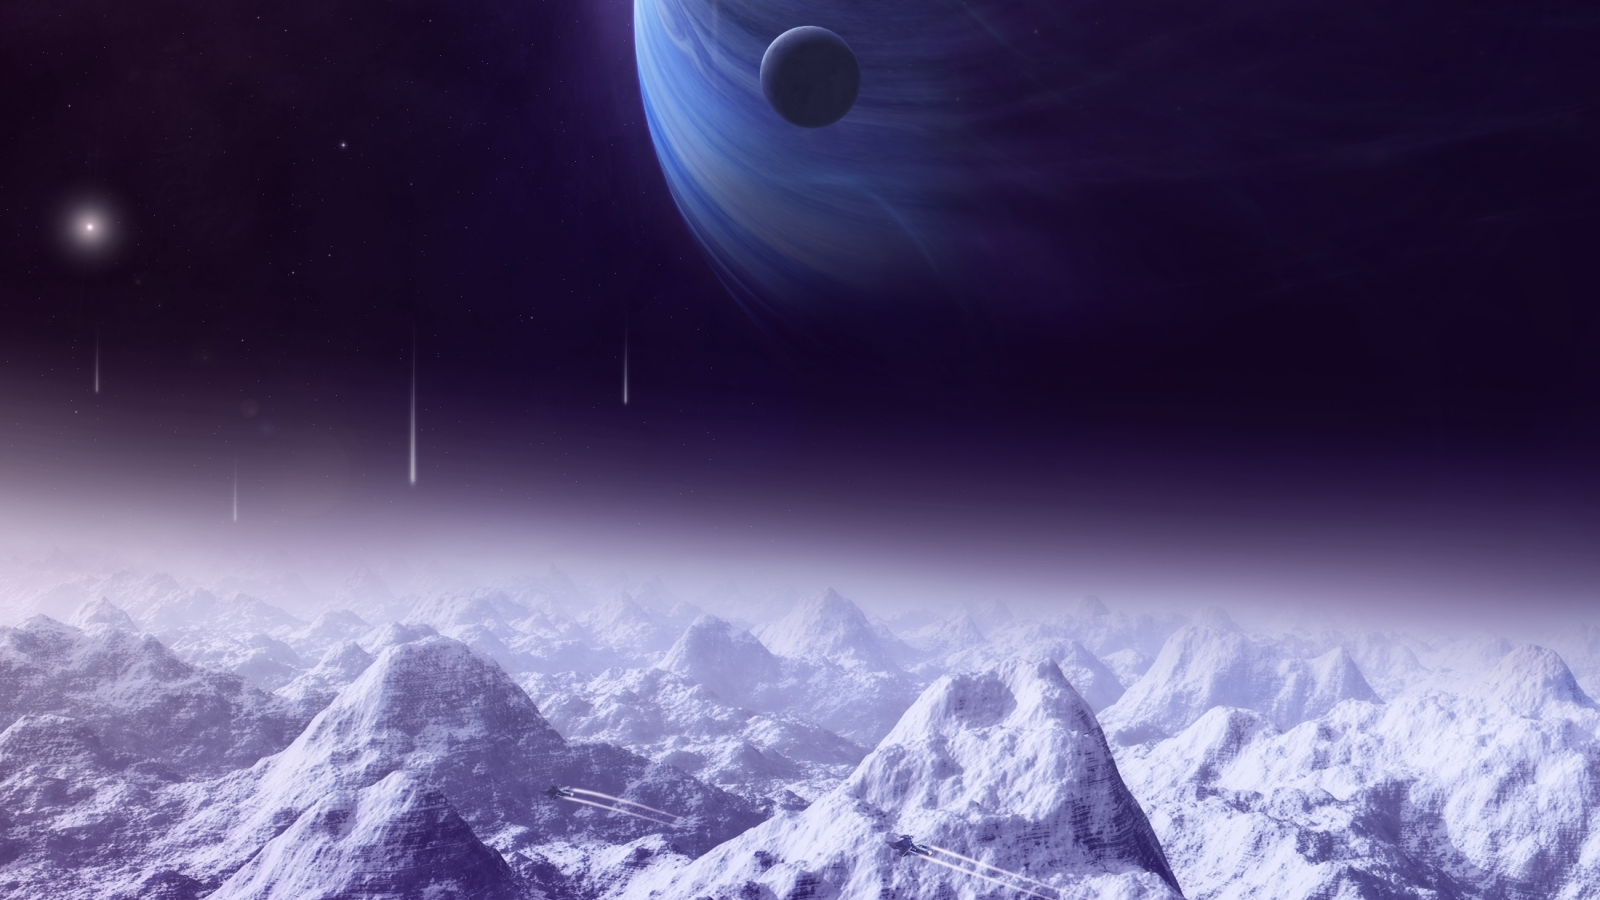 lights, satellite, planets, space ships, sci fi, moon, mountains